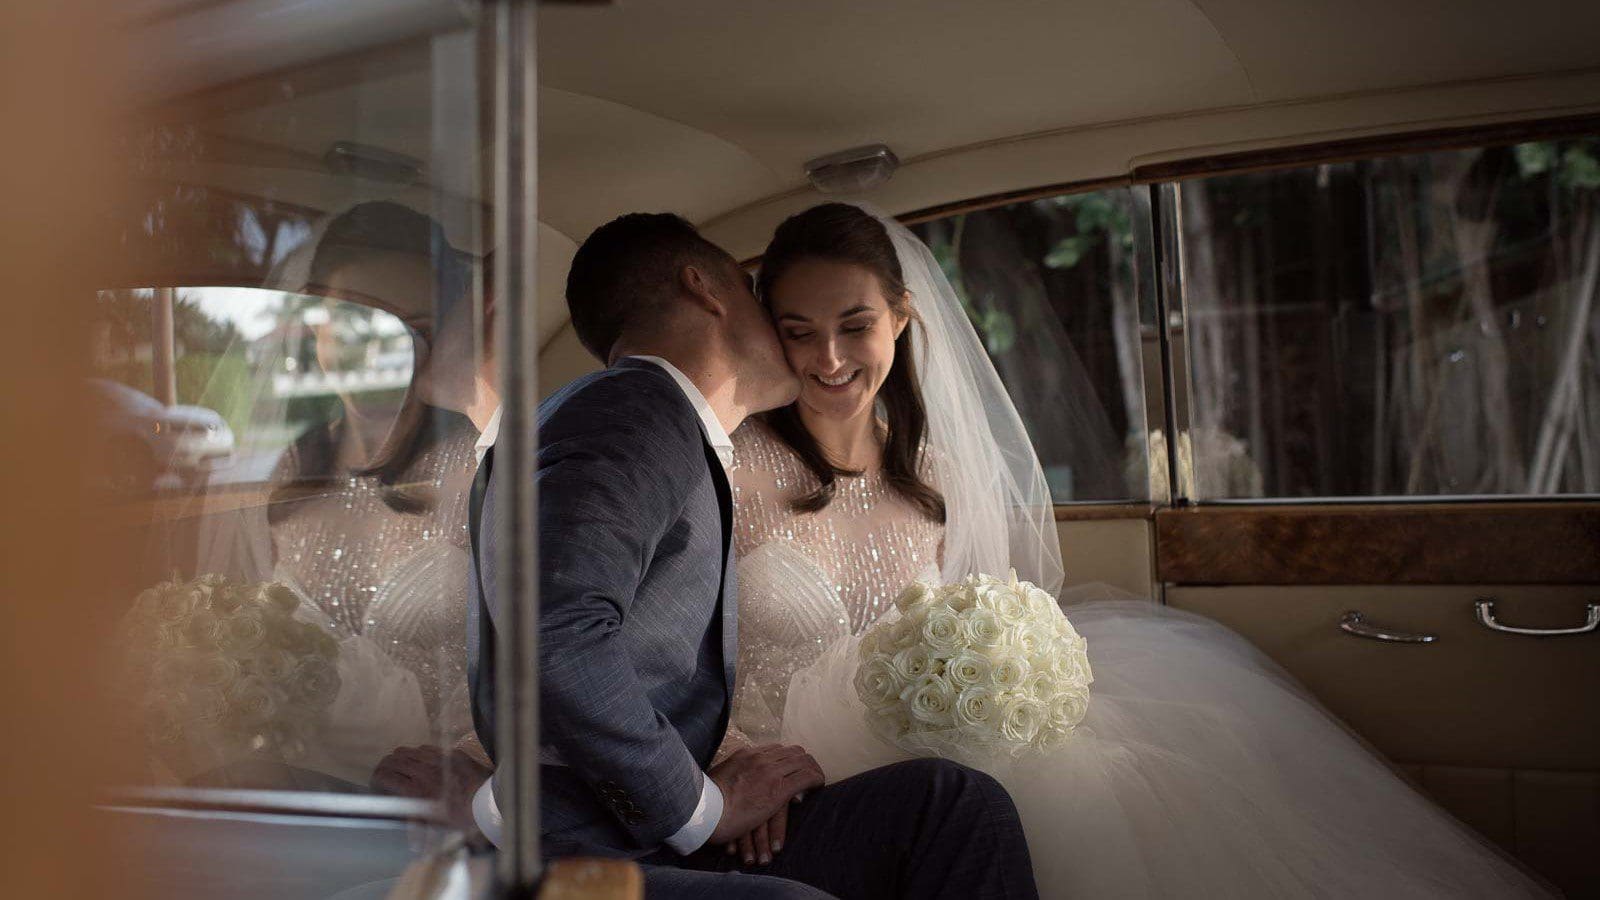 A bride and groom sharing a tender moment inside a vintage car, with the bride holding a bouquet and both partly obscured by her veil.